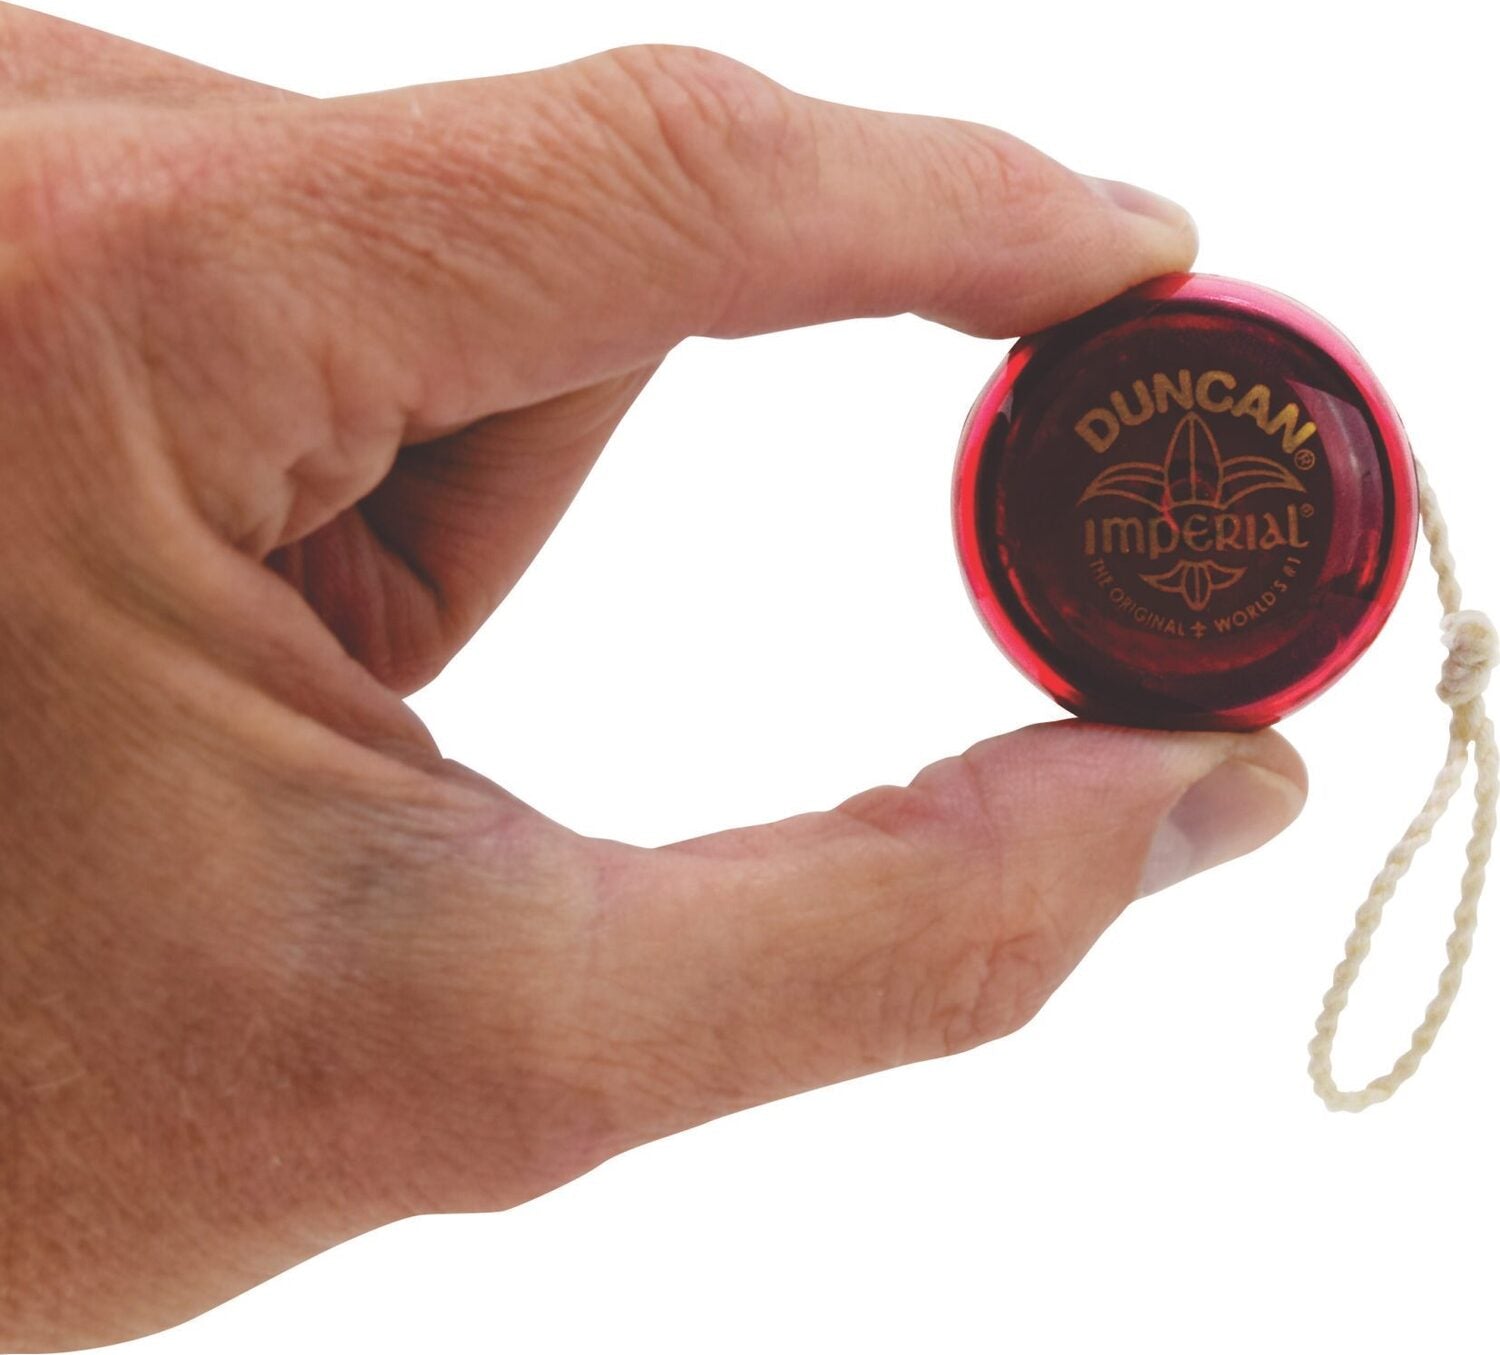 World's Smallest Duncan Imperial YoYo